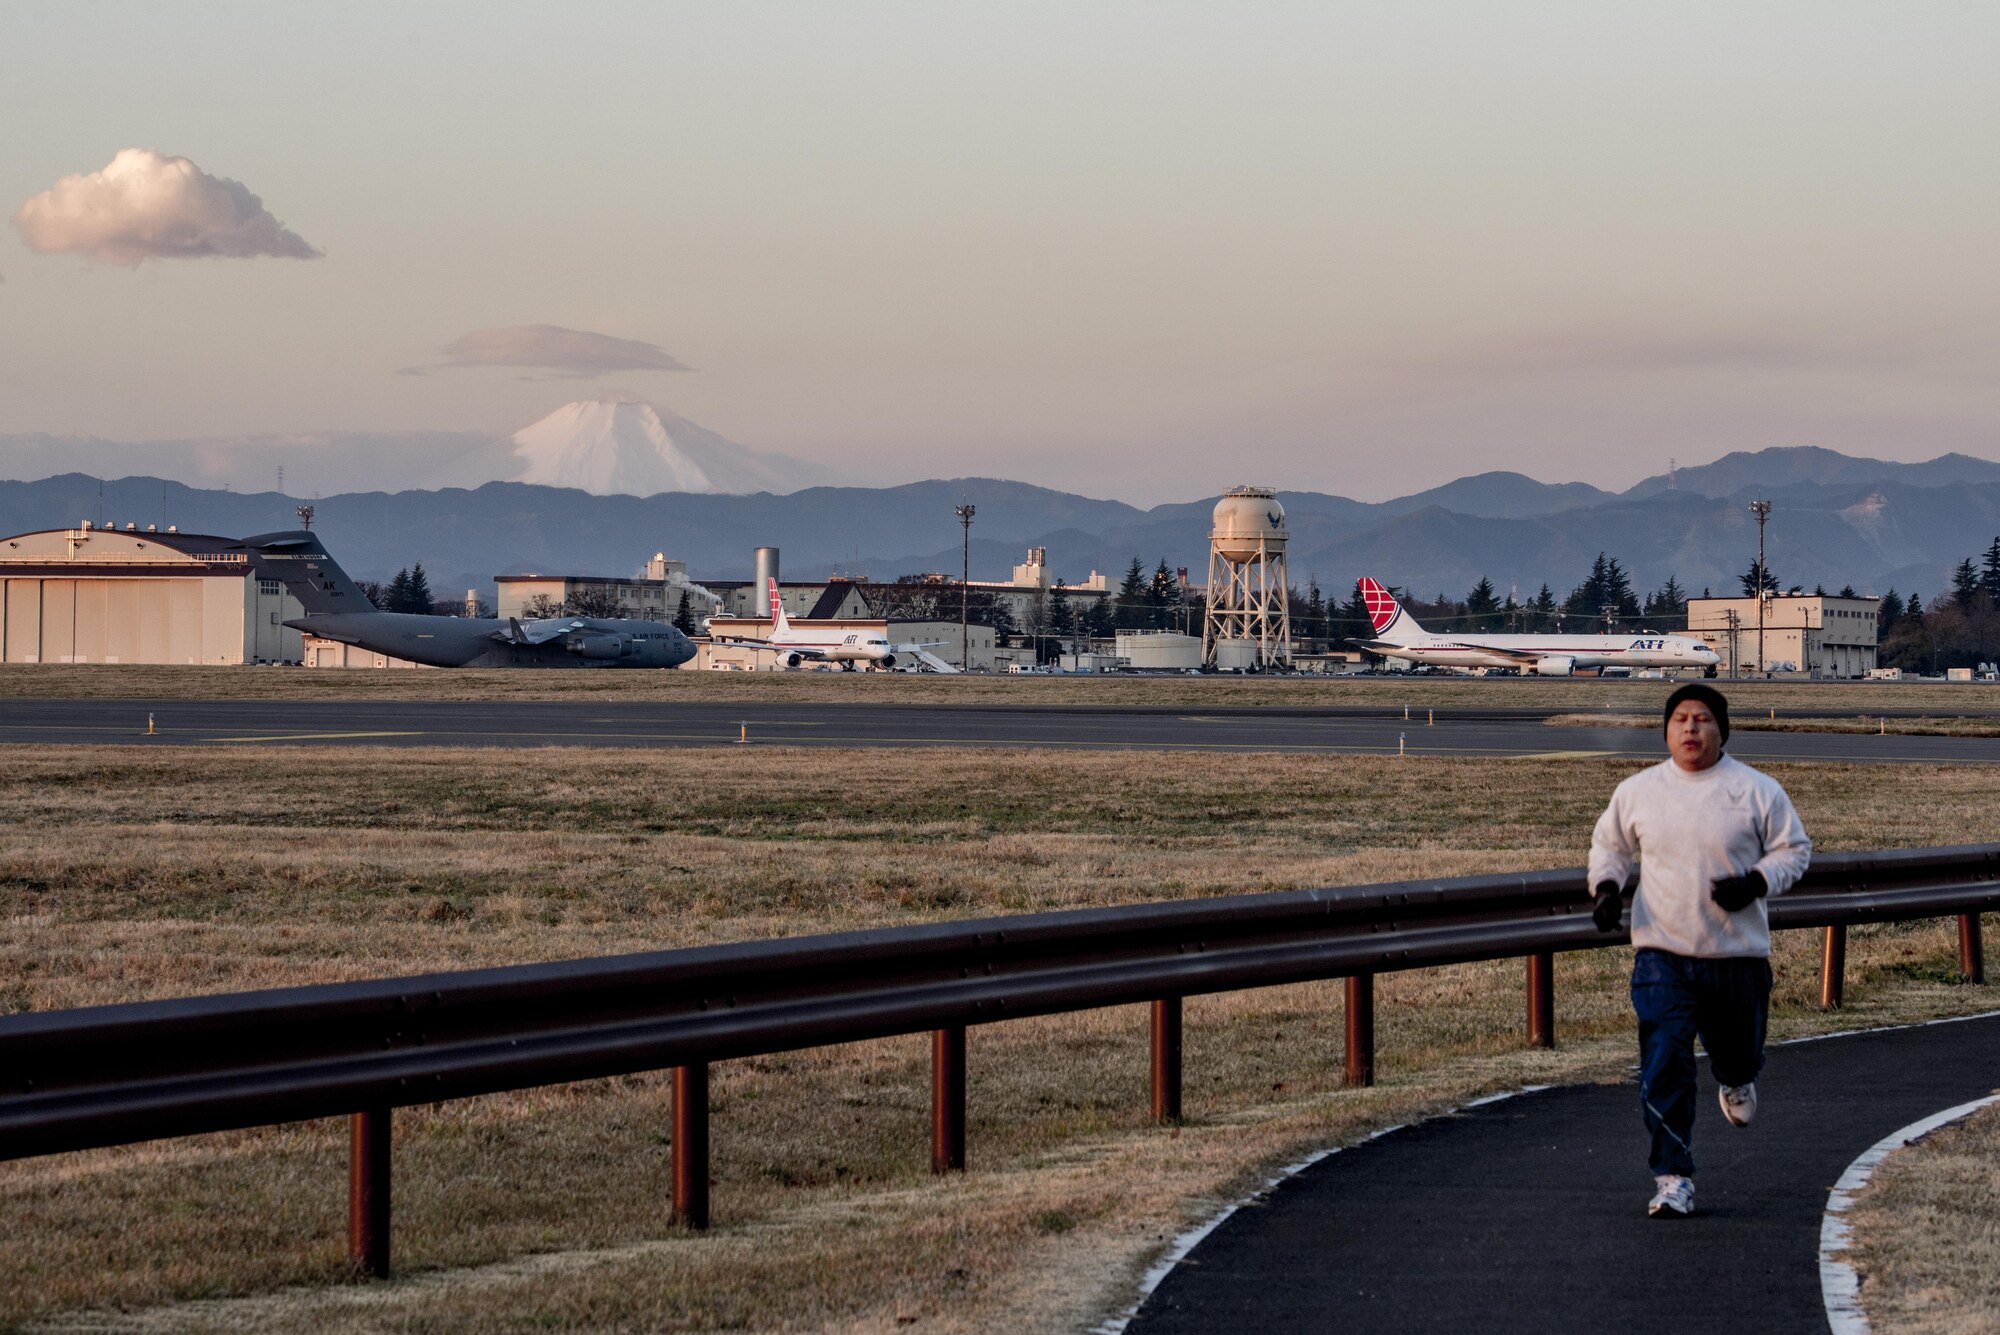 Master Sgt. Edward M. Silversmith, 374th Maintenance Squadron flight chief, runs along flight line on Dec. 9, 2016, at Yokota Air Base, Japan. Silversmith’s favorite place to run in Japan is along the flight line at Yokota in the mornings with Mt. Fuji in the background. (U.S. Air Force photo by Airman 1st Class Donald Hudson)